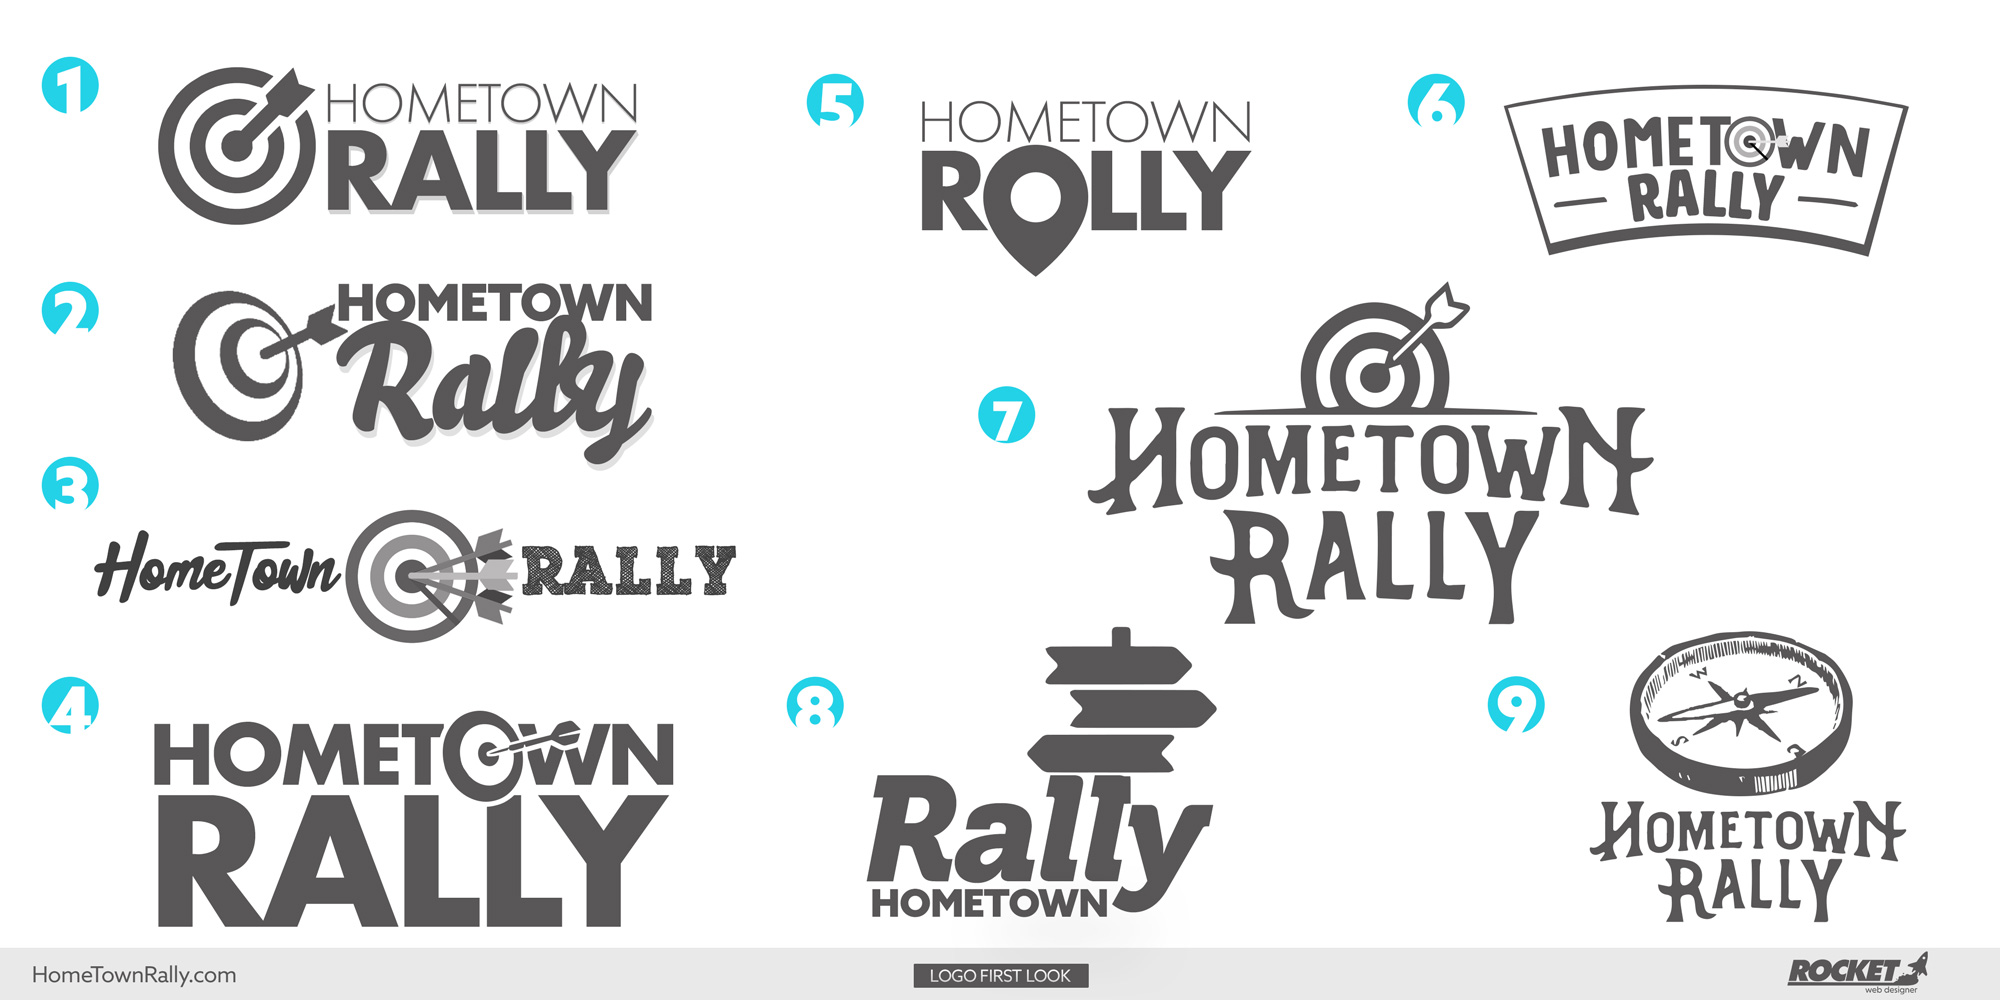 logo hometownrallly first look - Professional Website Design Company